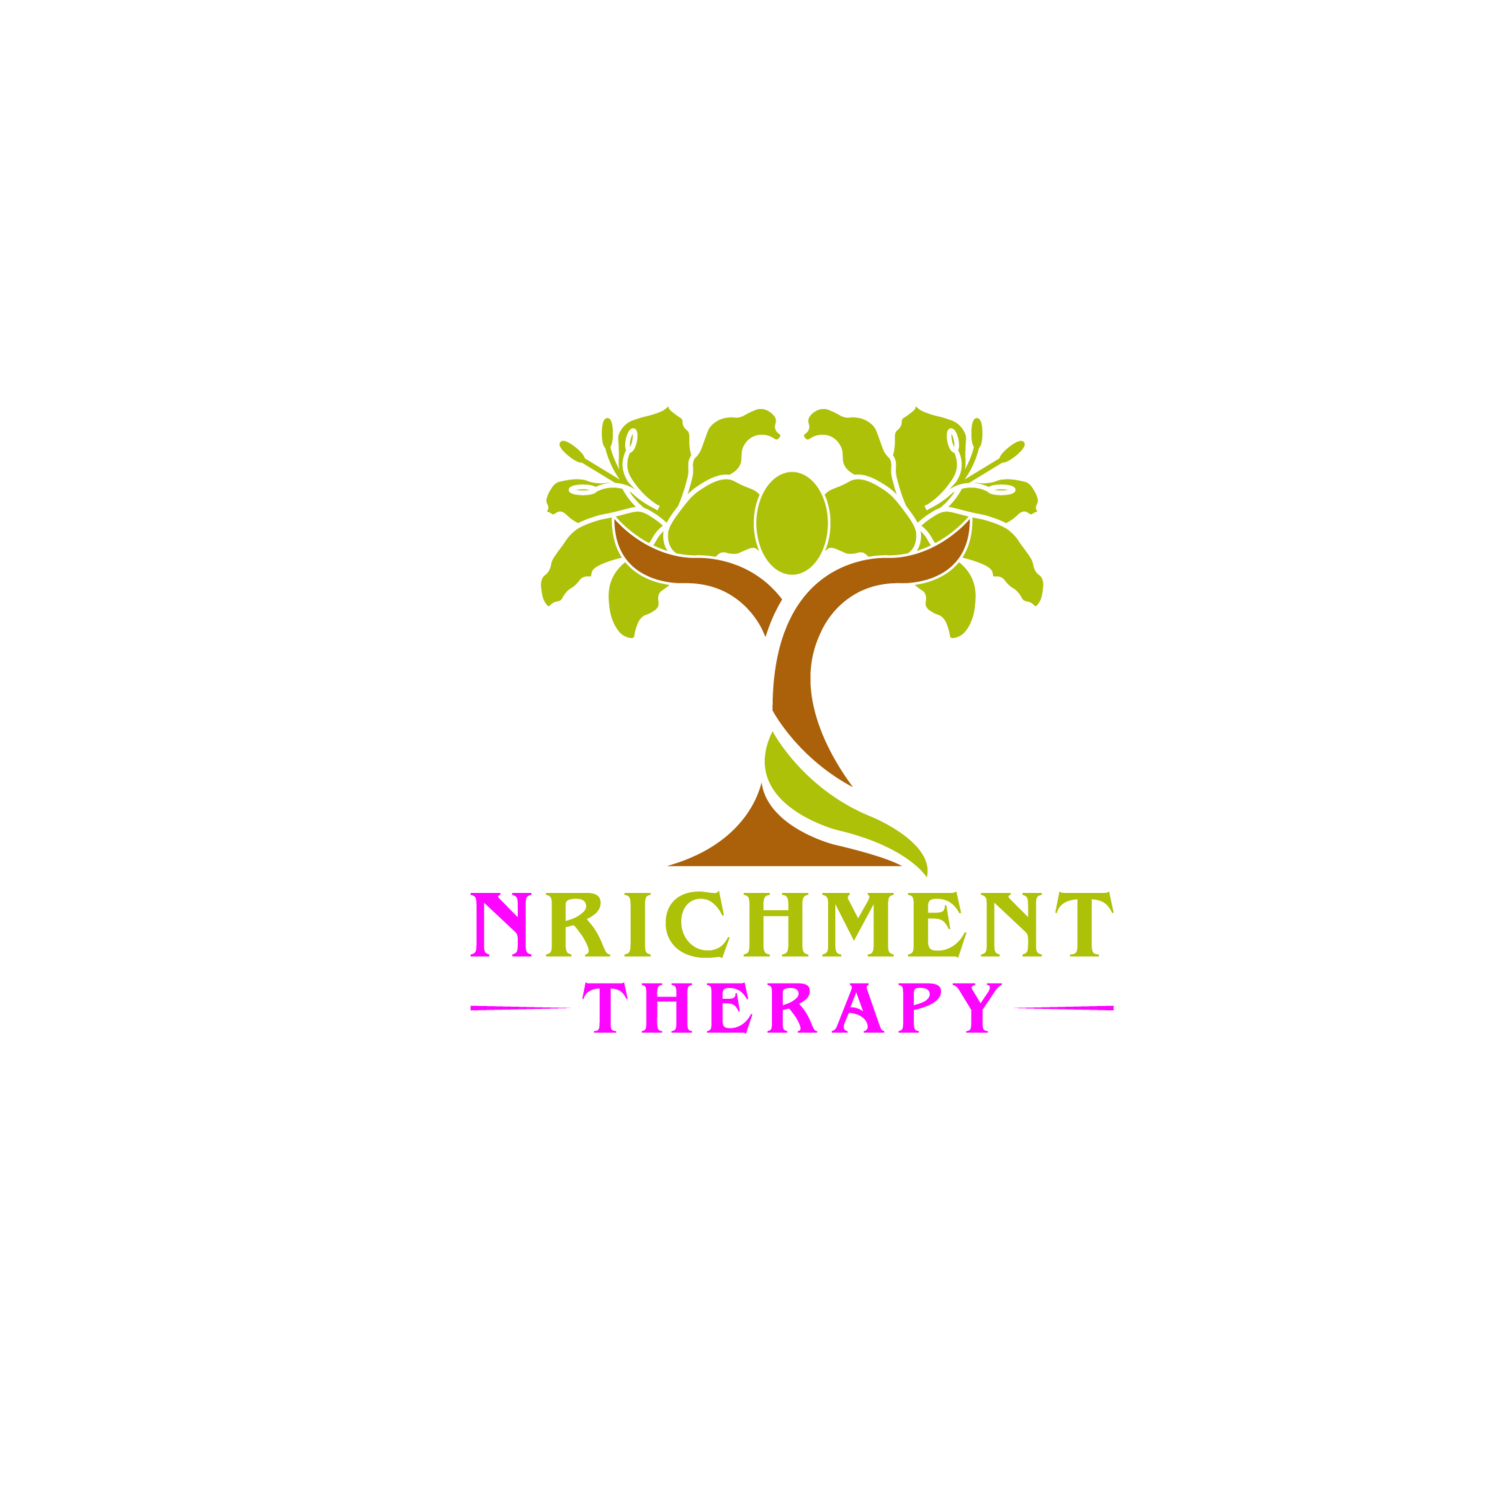 NRichment Therapy